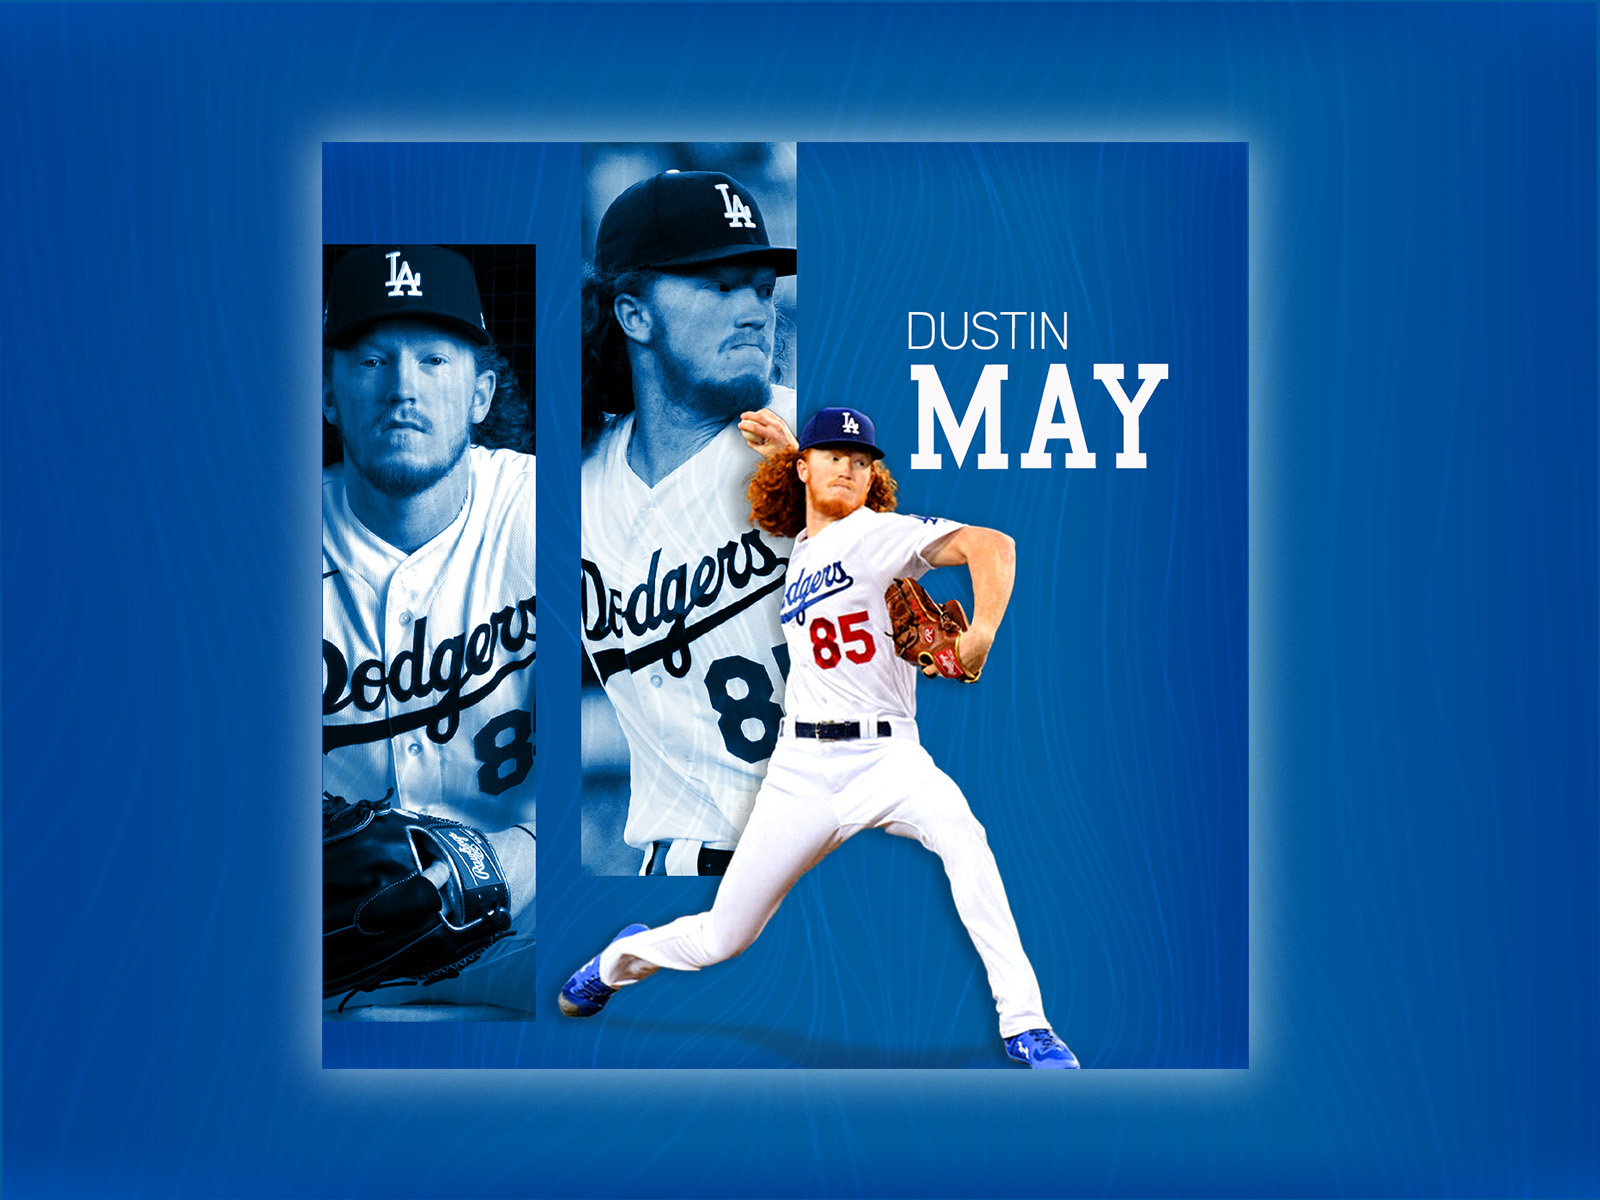 Dustin May  Dodgers by Brianna Gable on Dribbble